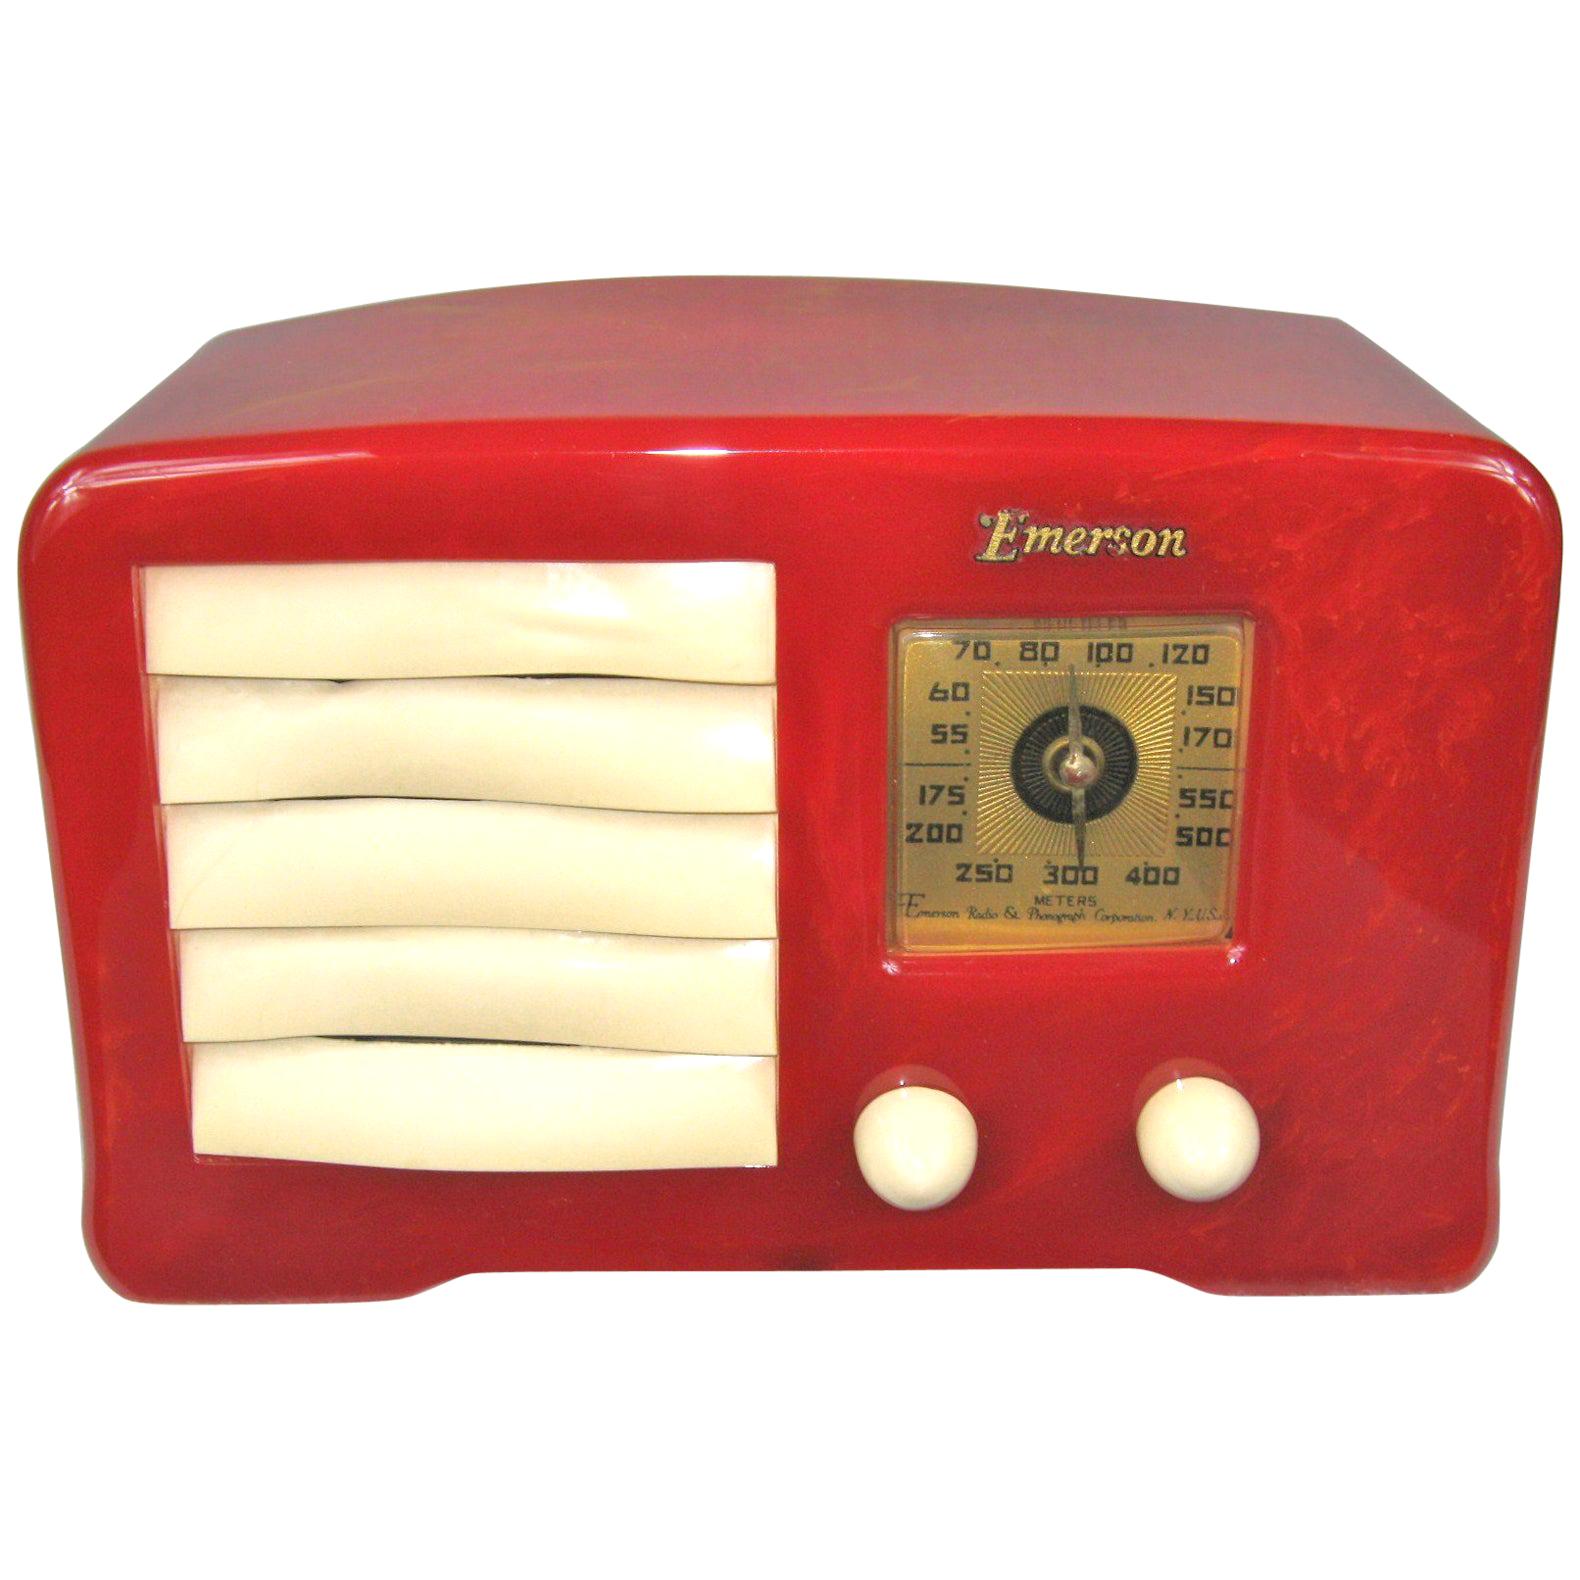 1938 RADIO Emerson AX-235 Red with Off-White Trim Original  For Sale